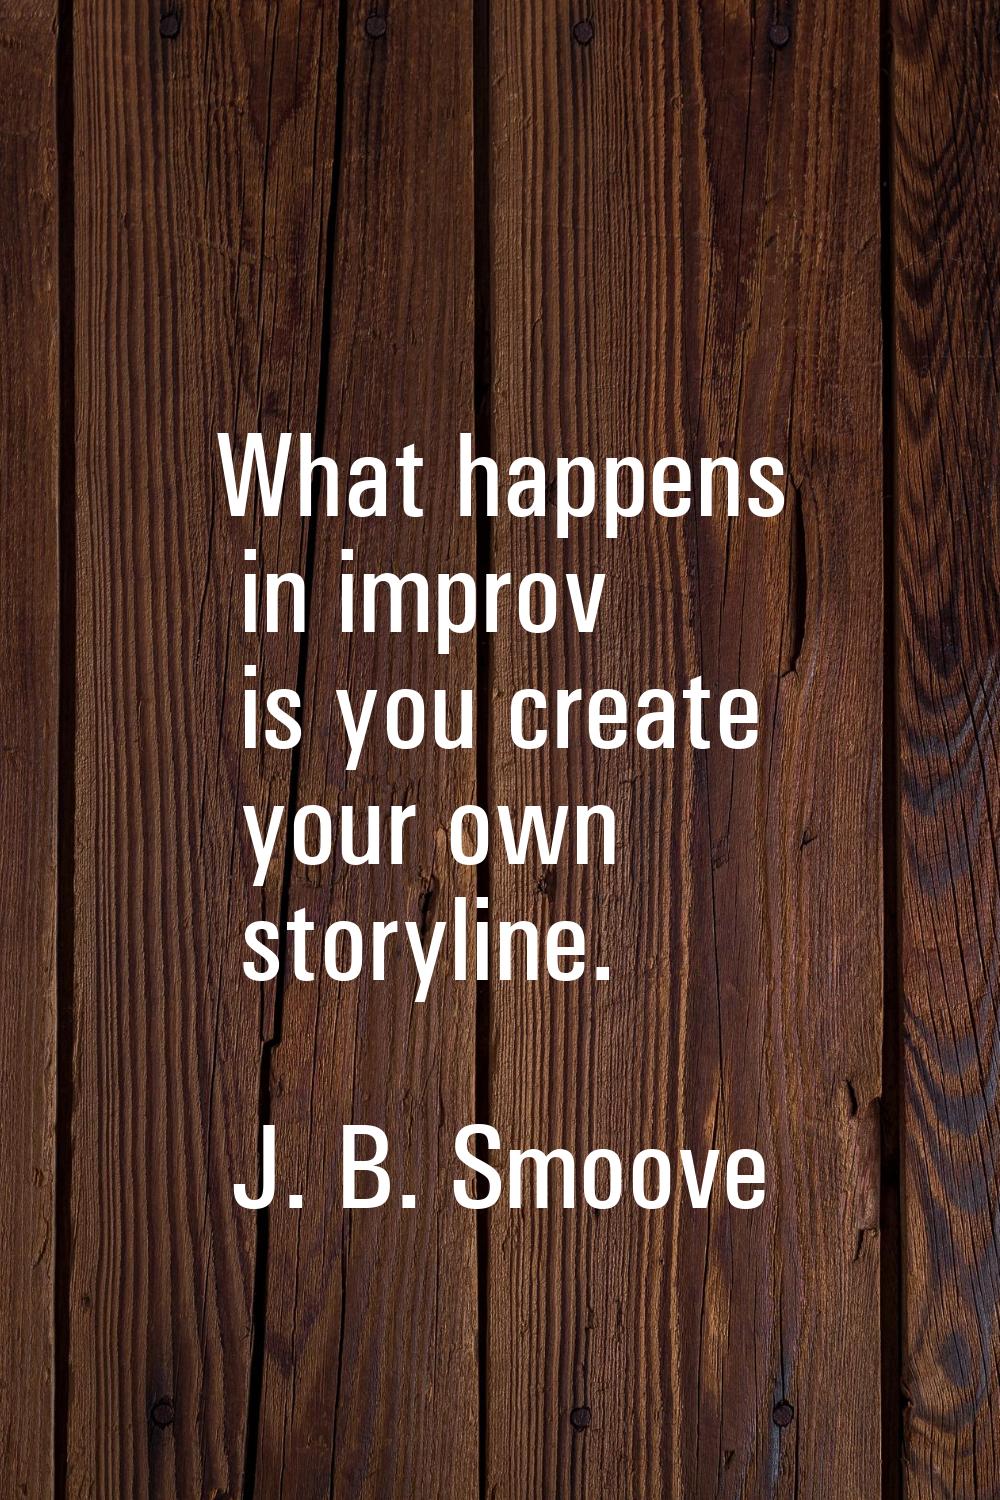 What happens in improv is you create your own storyline.